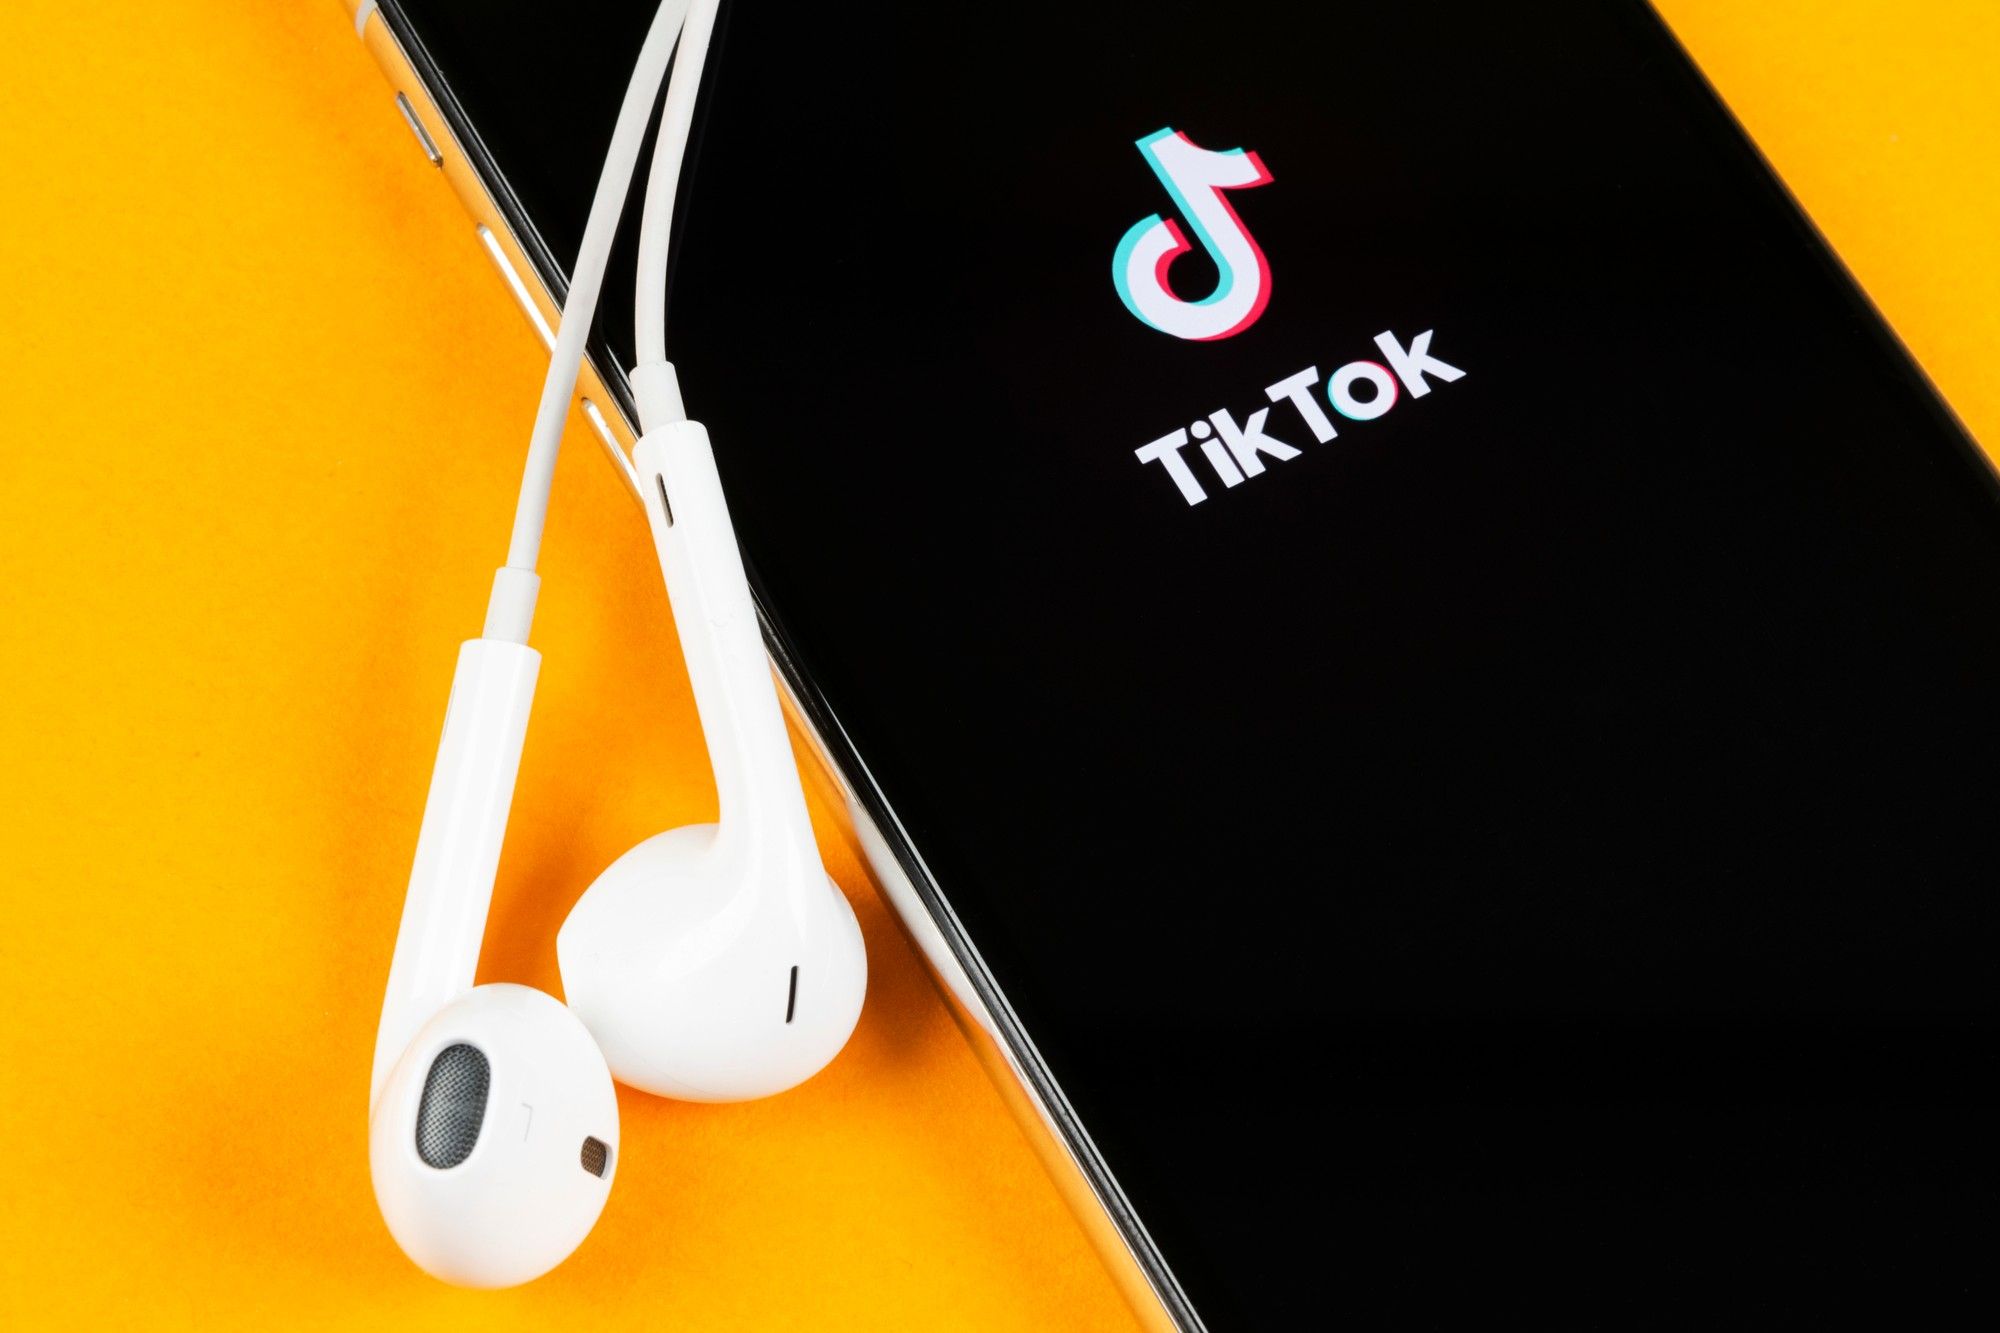 TikTok users claim that children's data has been unlawfully collected.